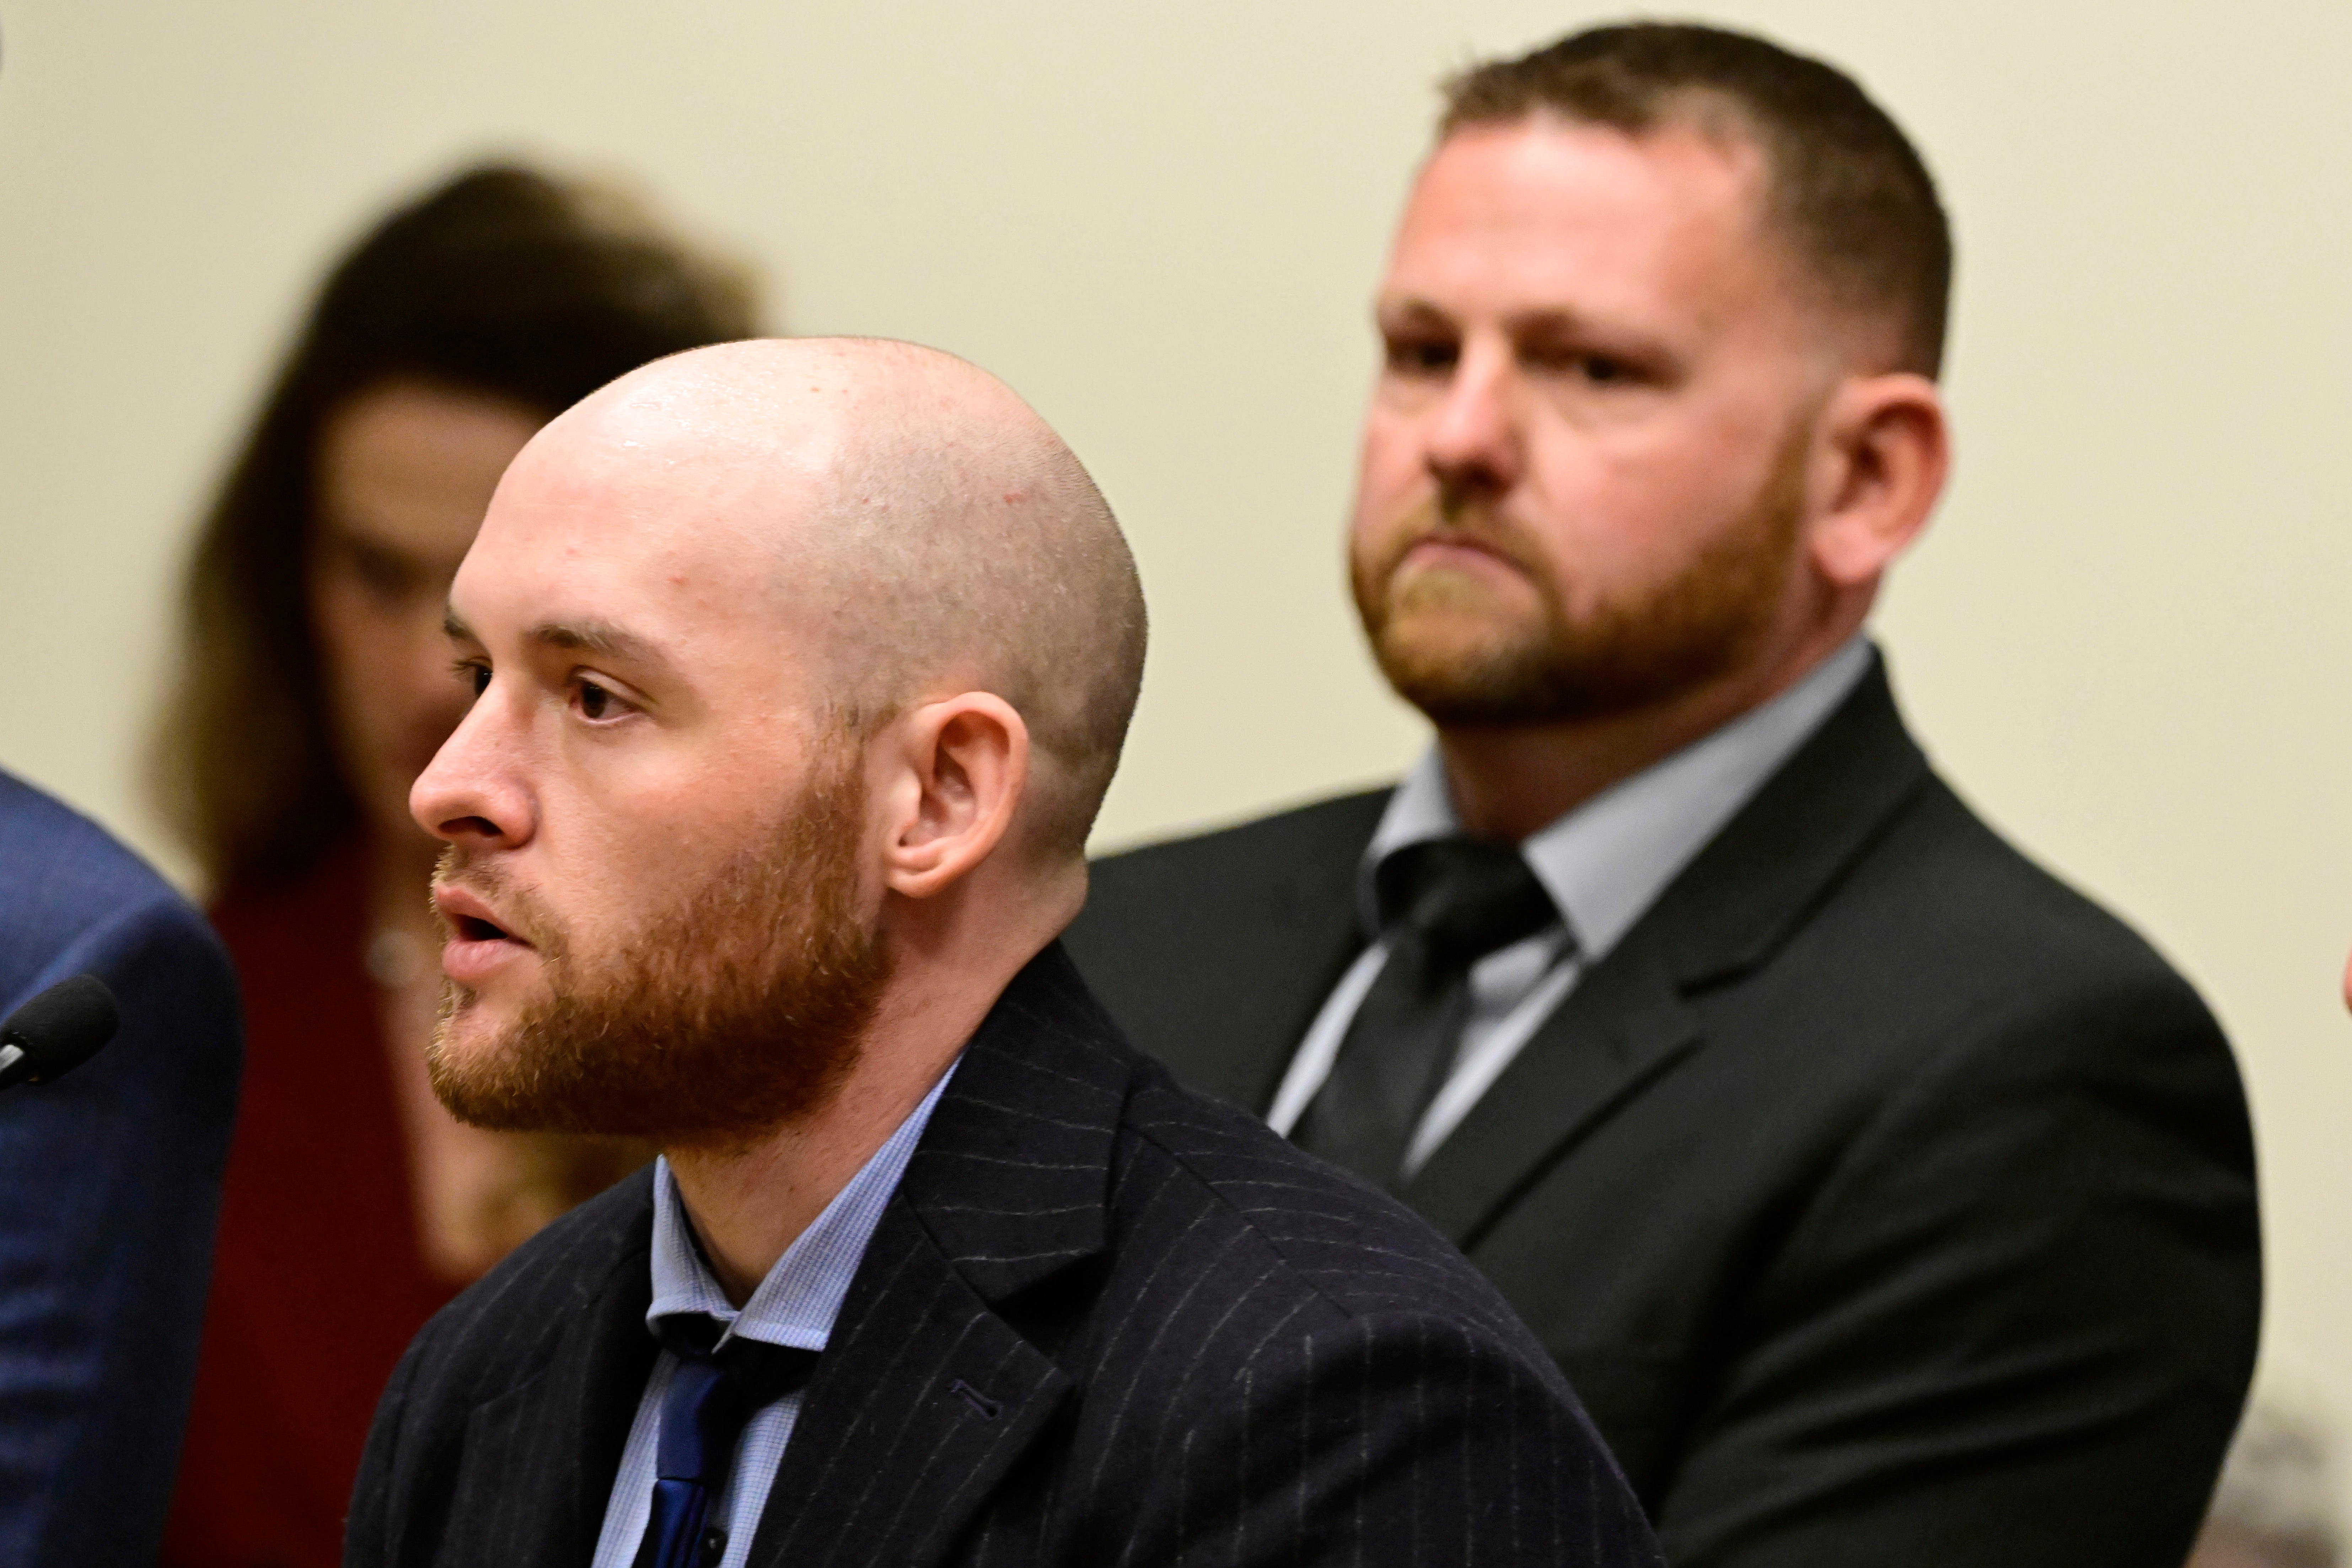 Former officer Jason Rosenblatt, left, and Aurora Police Officer Randy Roedema, right, at an arraignment at the Adams County Justice Center in Brighton, Colorado in January 2023